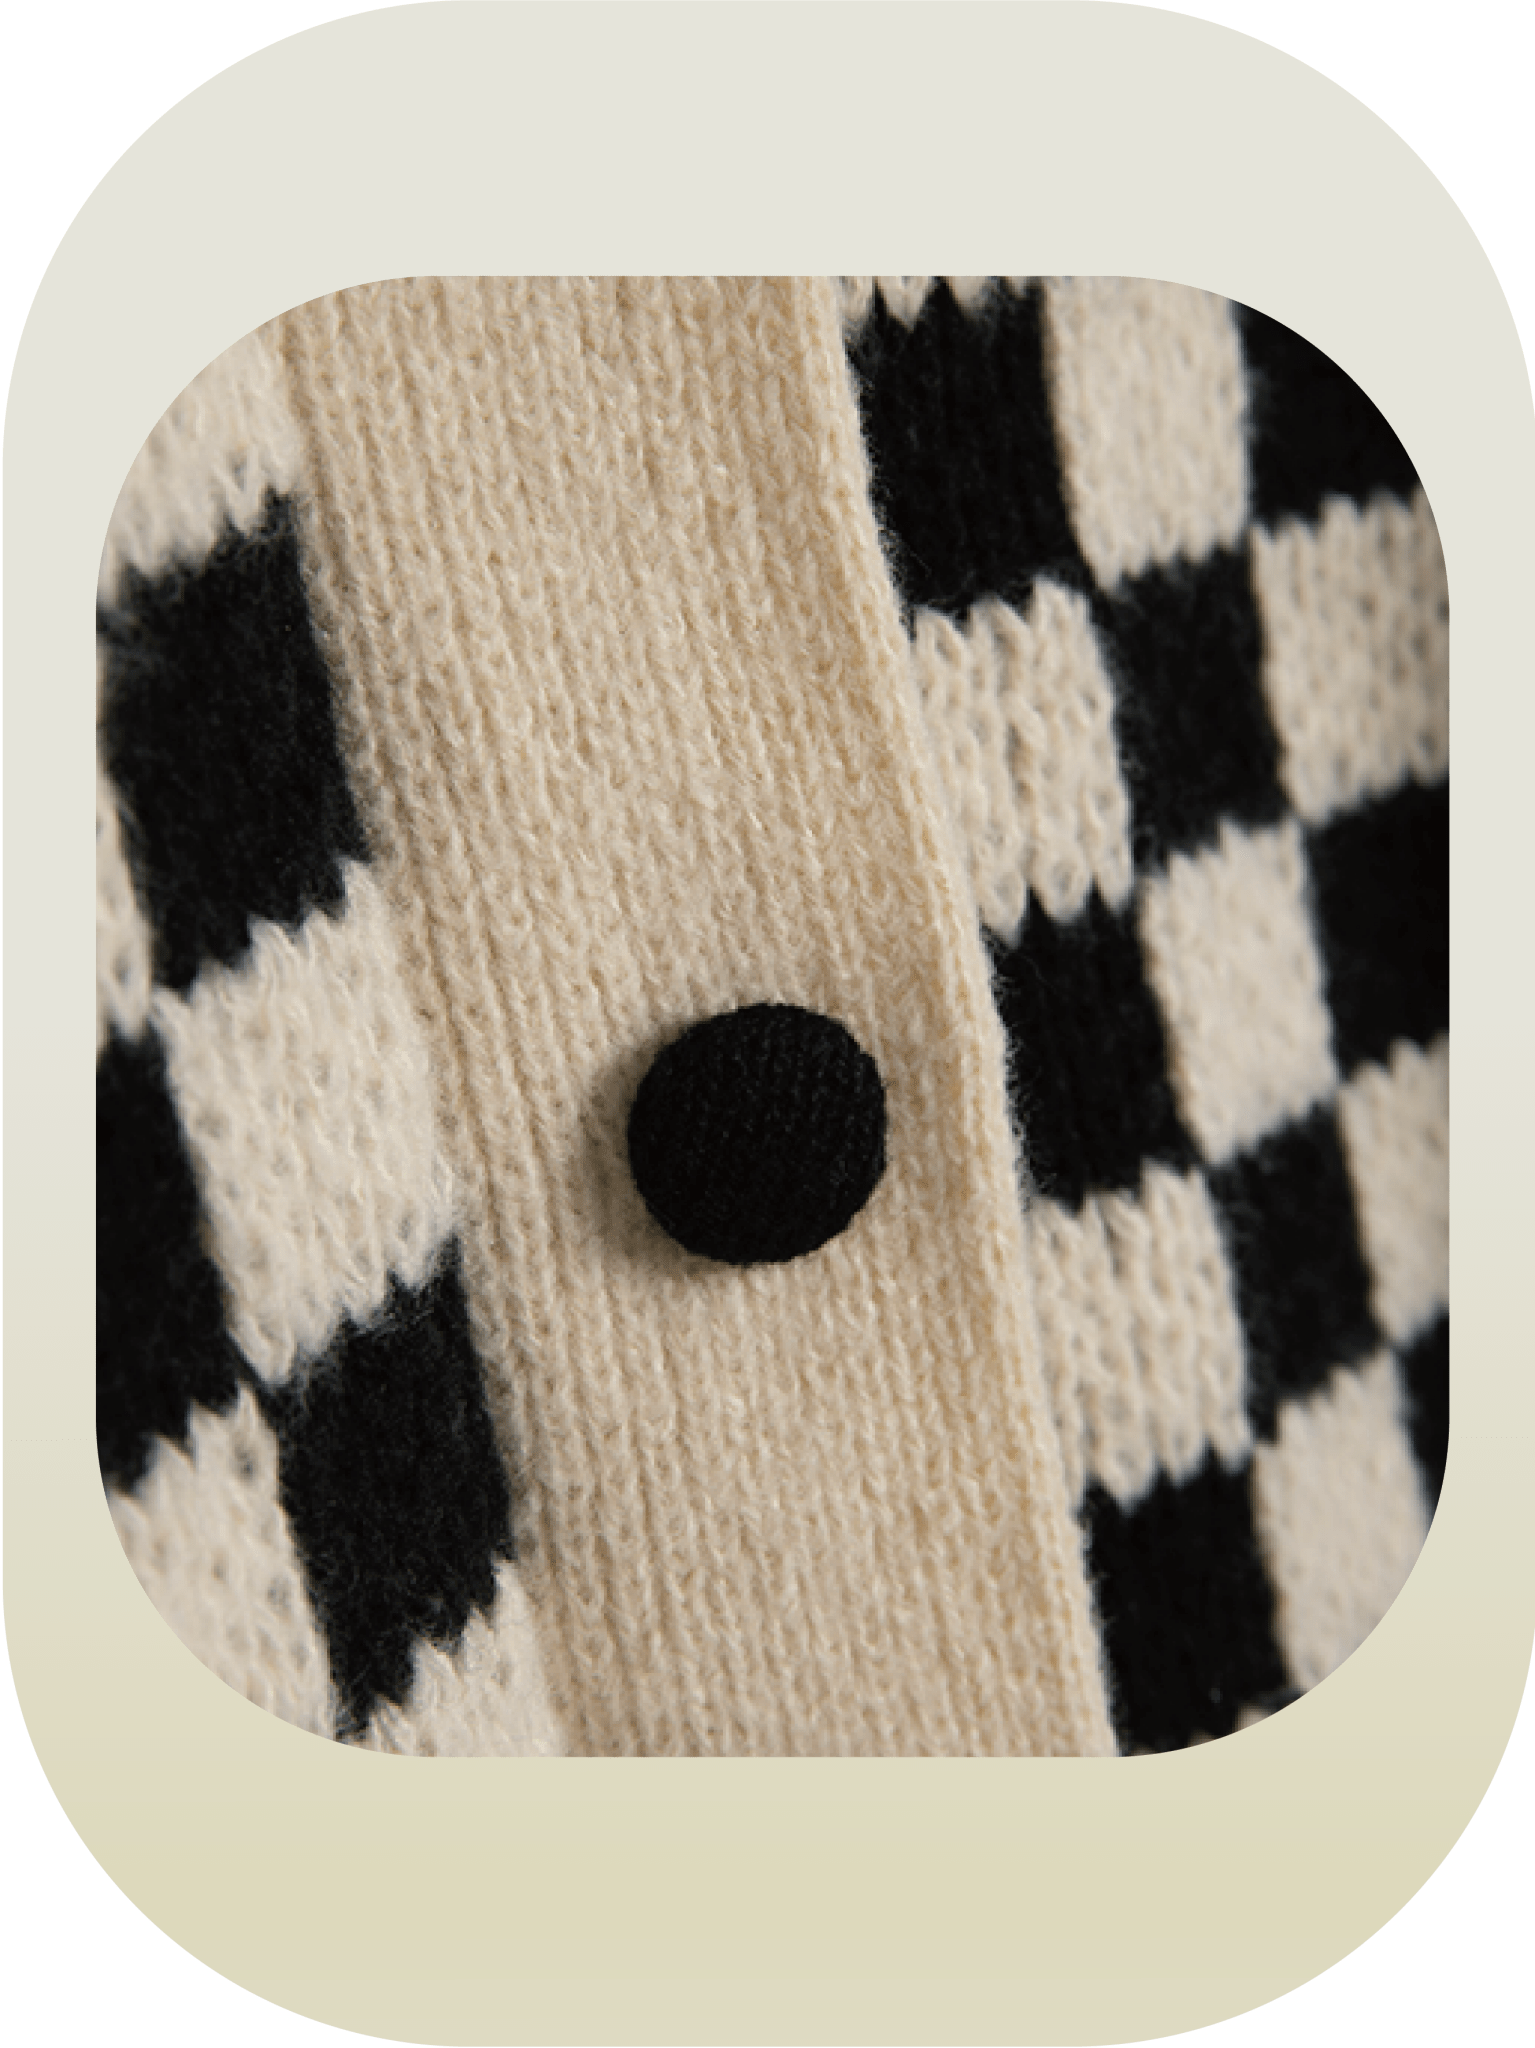 Round Collar Checker Cardigan - LOVE POMME POMME